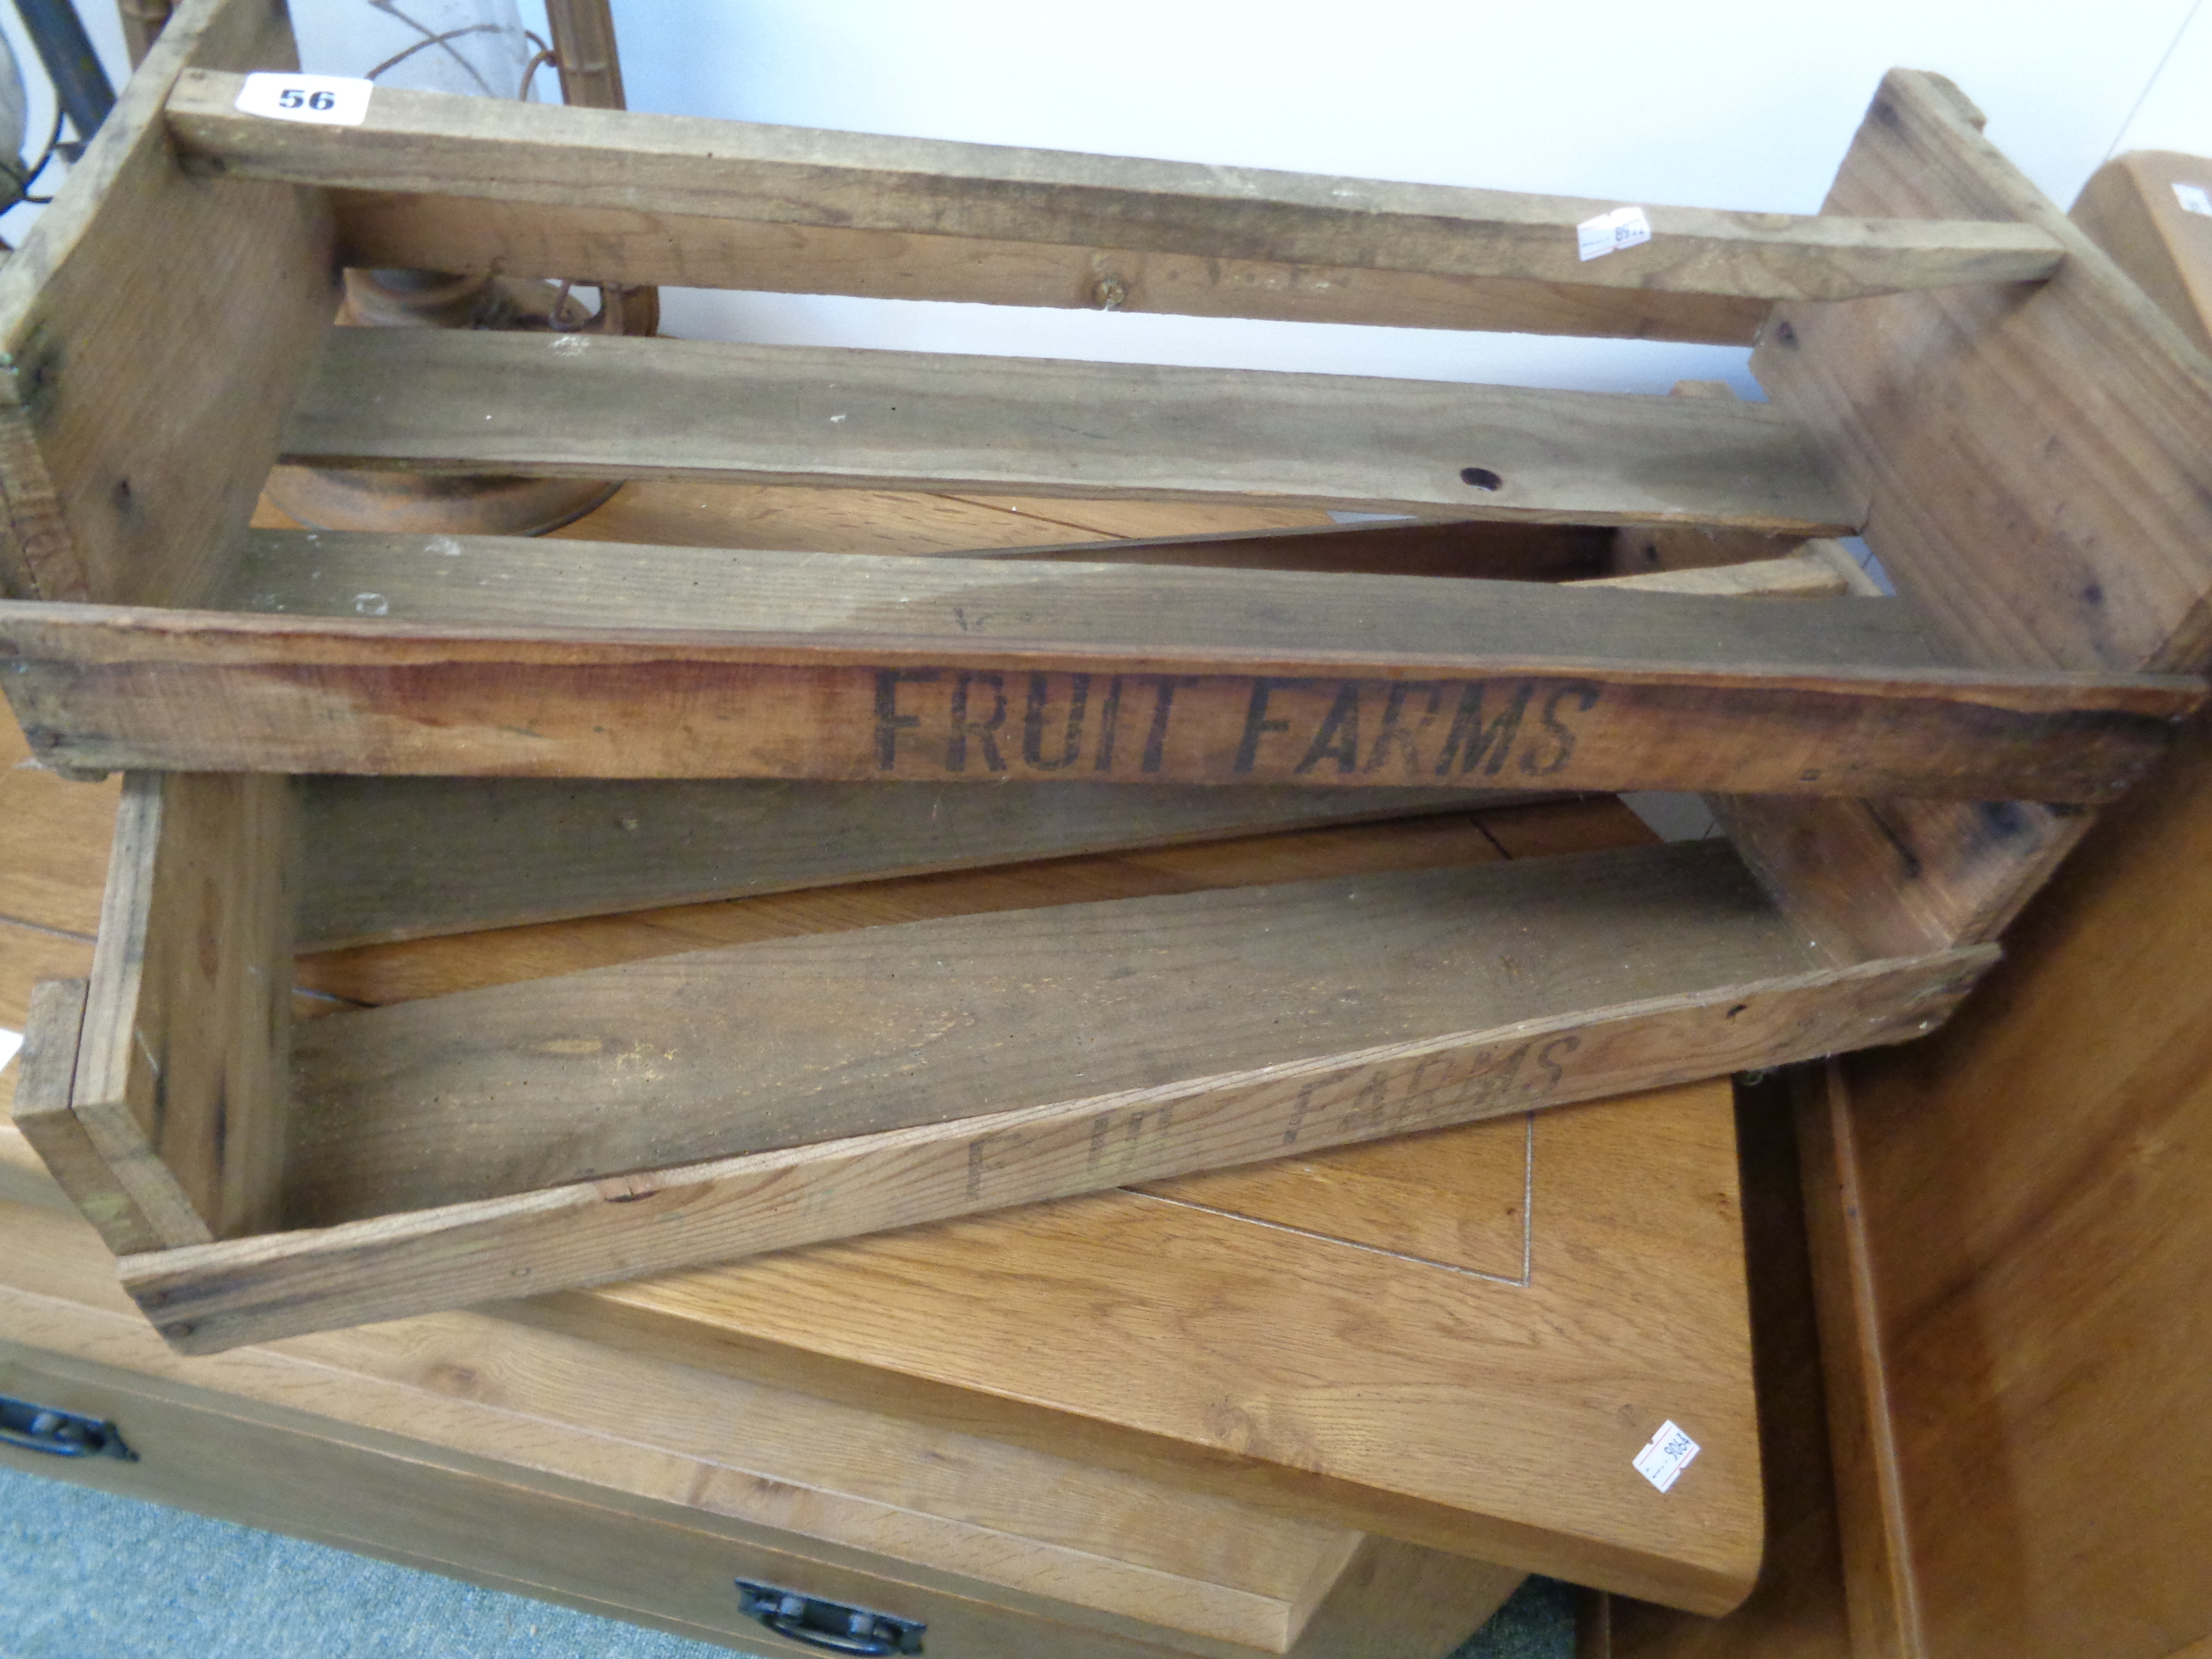 2 Vintage Wooden Fruit Farm trays, Condition - Staining from age